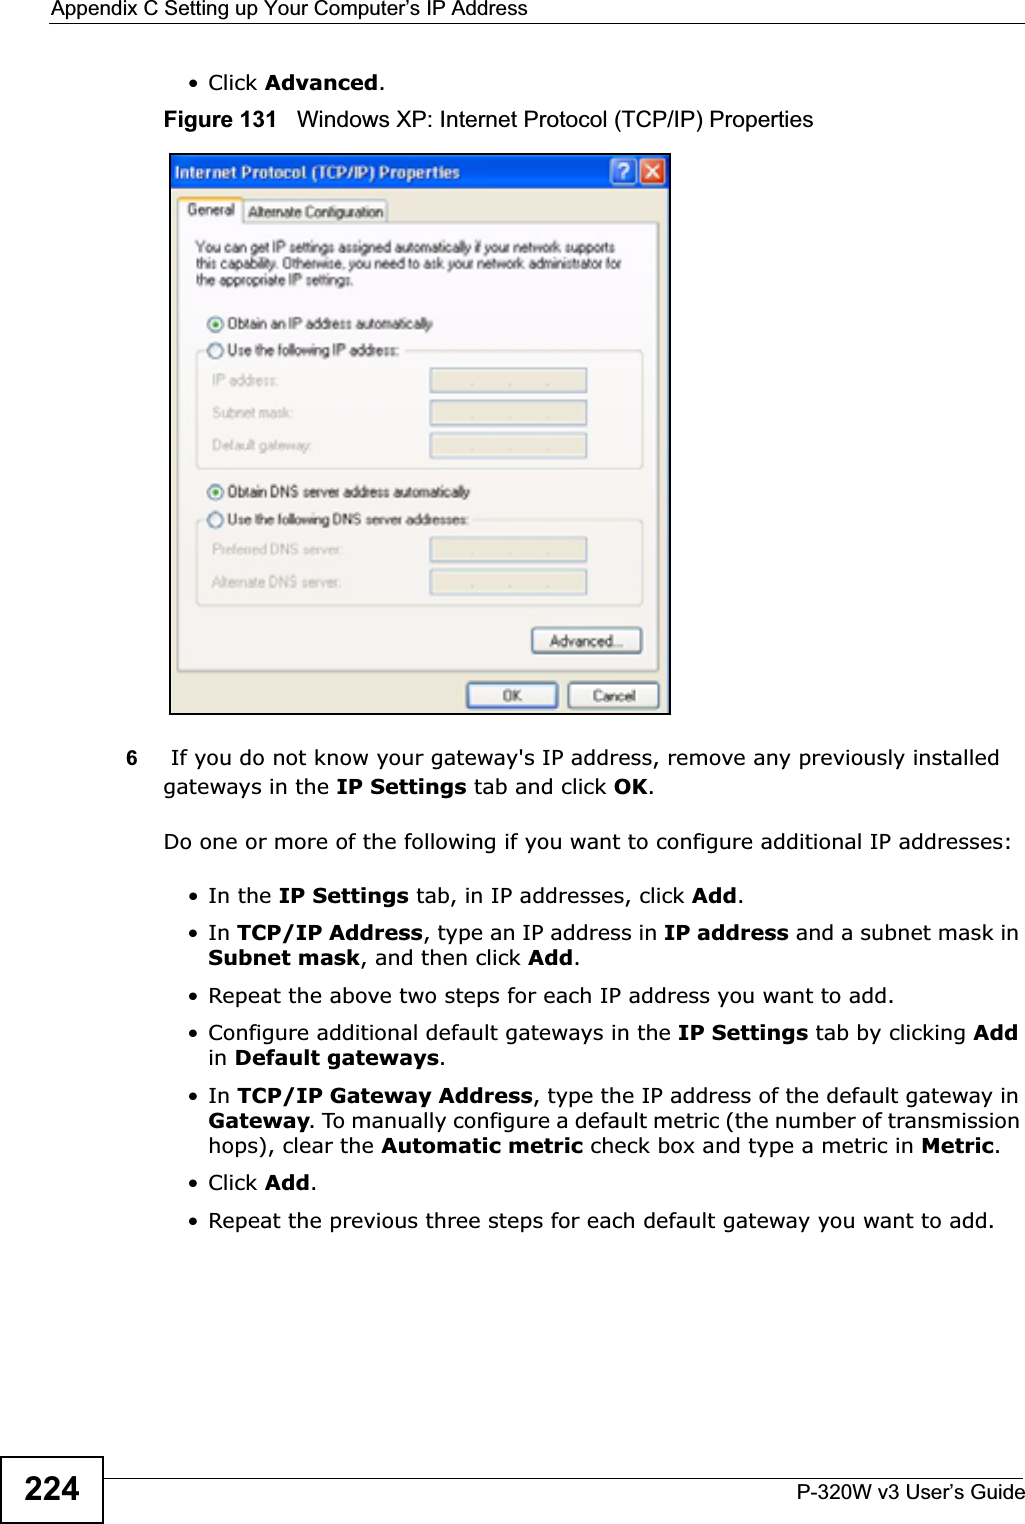 Appendix C Setting up Your Computer’s IP AddressP-320W v3 User’s Guide224•Click Advanced.Figure 131   Windows XP: Internet Protocol (TCP/IP) Properties6 If you do not know your gateway&apos;s IP address, remove any previously installed gateways in the IP Settings tab and click OK.Do one or more of the following if you want to configure additional IP addresses:•In the IP Settings tab, in IP addresses, click Add.•In TCP/IP Address, type an IP address in IP address and a subnet mask in Subnet mask, and then click Add.• Repeat the above two steps for each IP address you want to add.• Configure additional default gateways in the IP Settings tab by clicking Addin Default gateways.•In TCP/IP Gateway Address, type the IP address of the default gateway in Gateway. To manually configure a default metric (the number of transmission hops), clear the Automatic metric check box and type a metric in Metric.•Click Add.• Repeat the previous three steps for each default gateway you want to add.